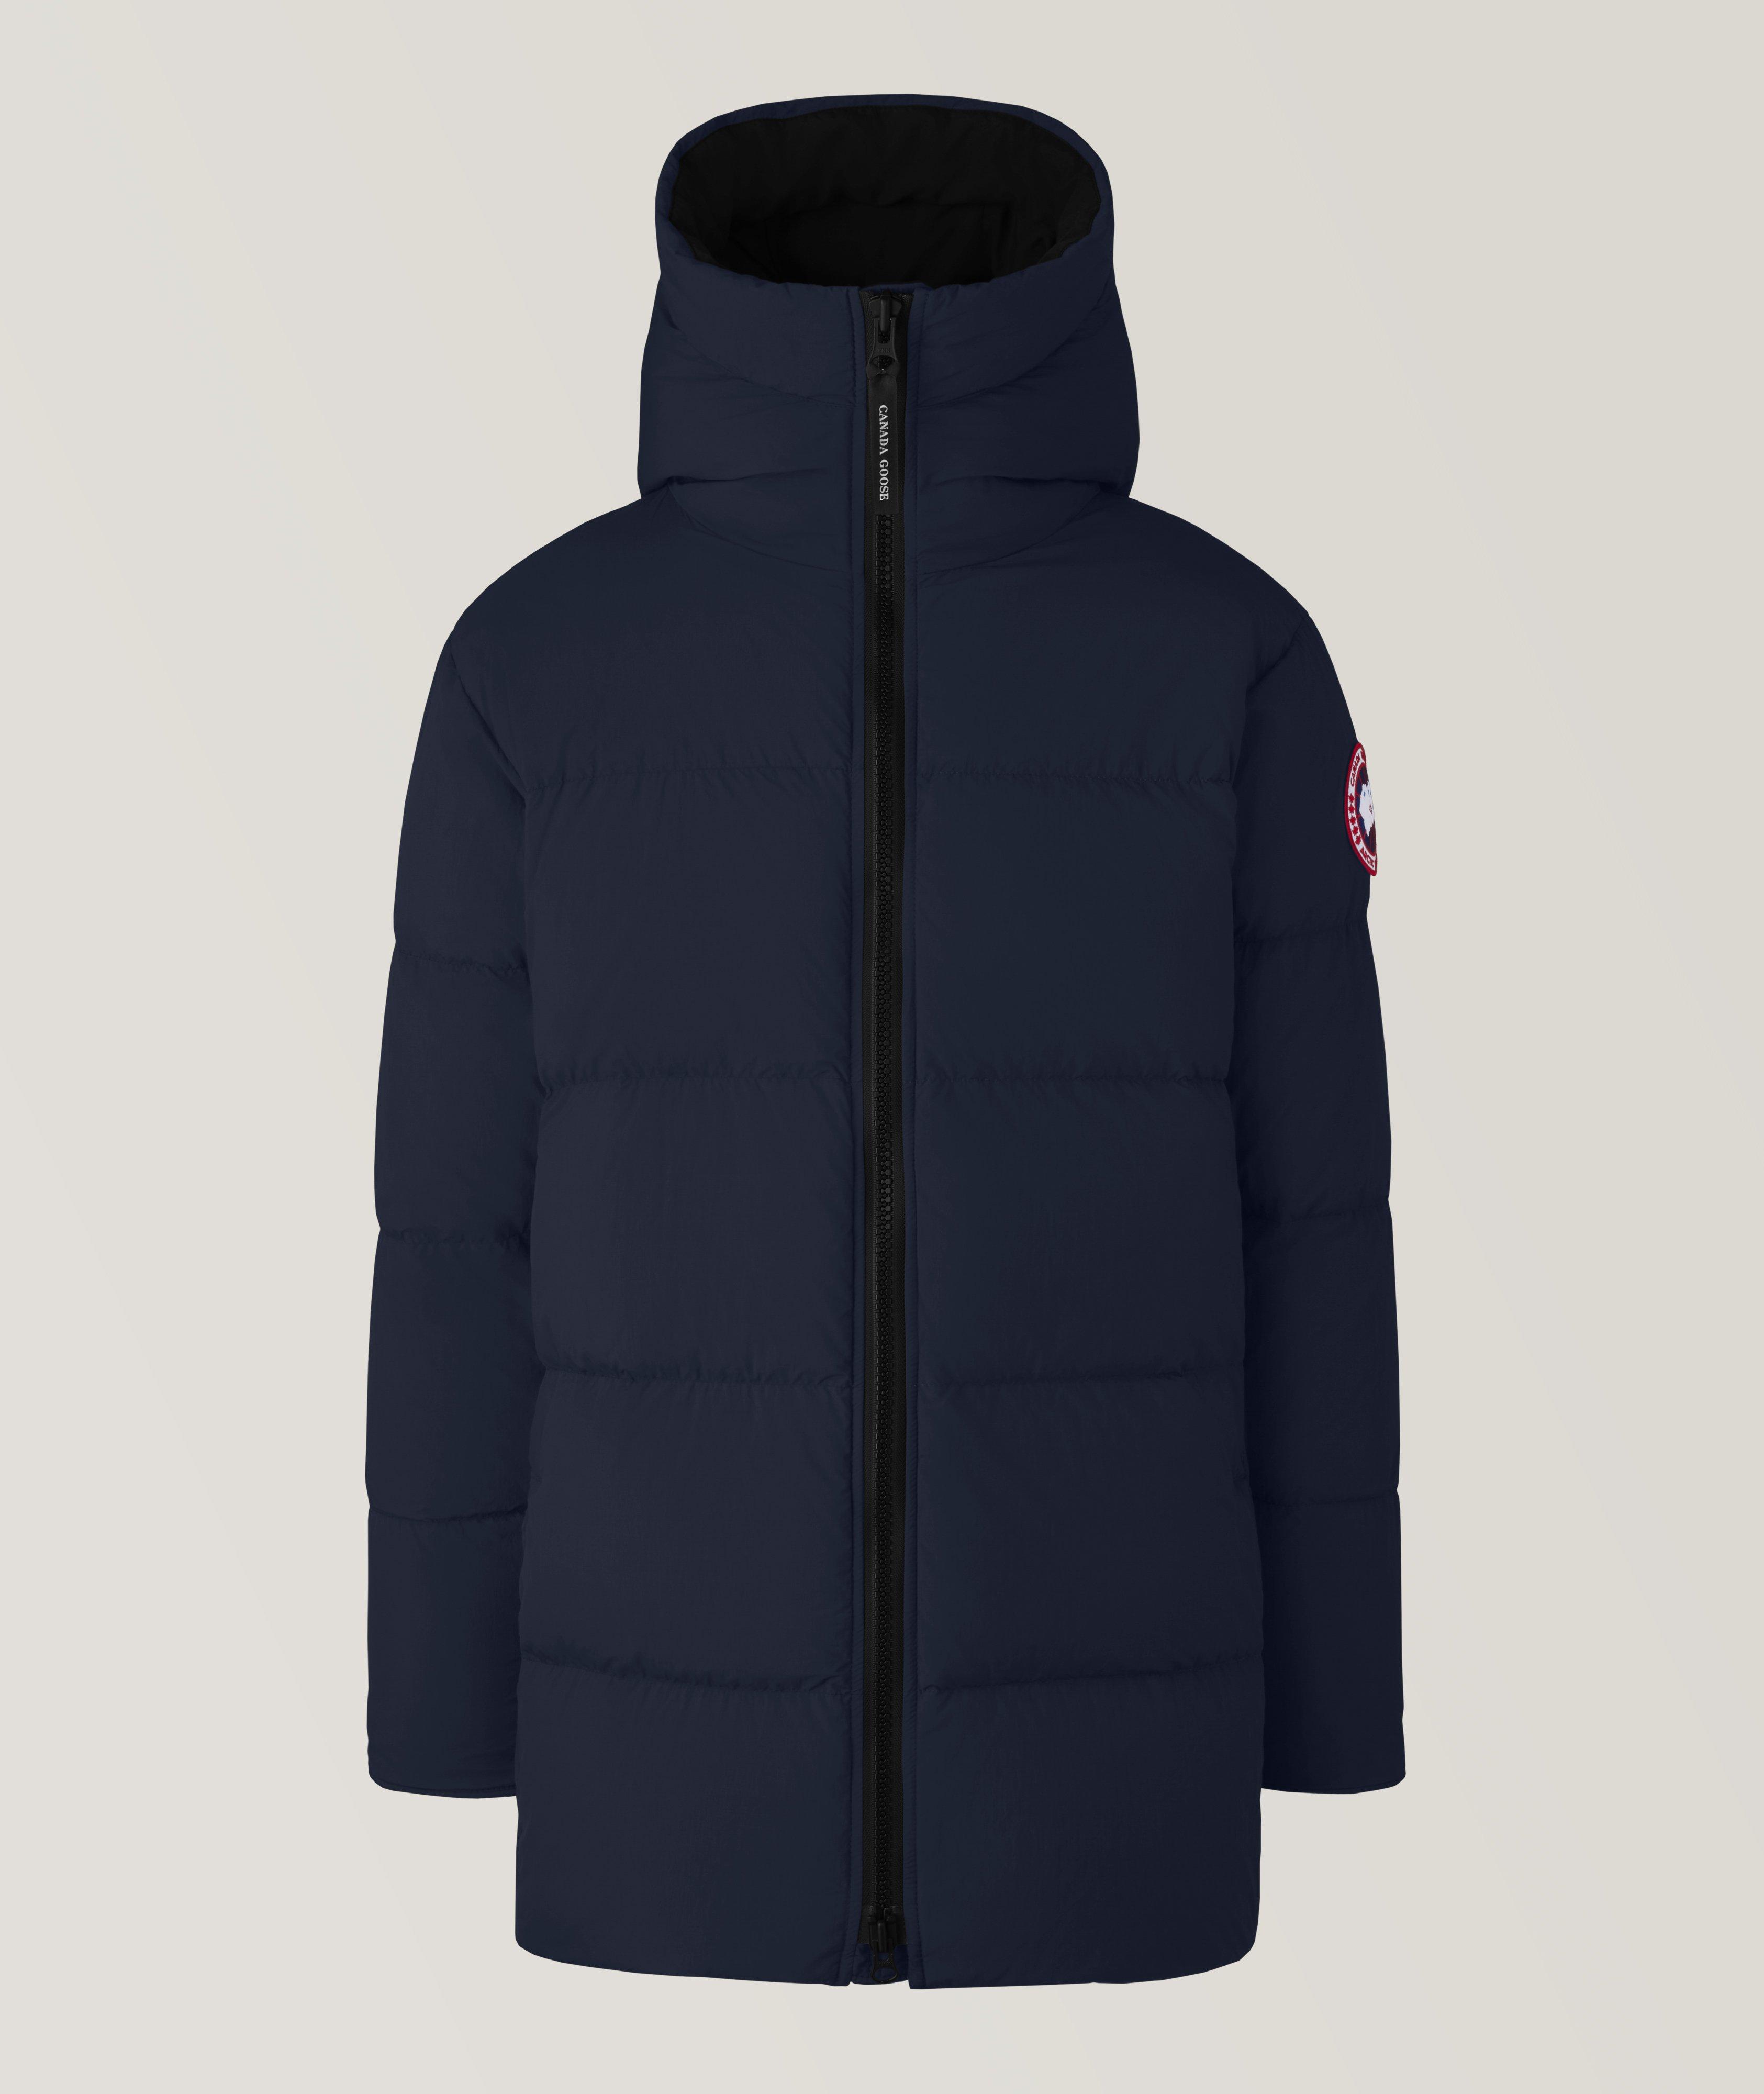 Lawrence Down-Filled Puffer Jacket image 0